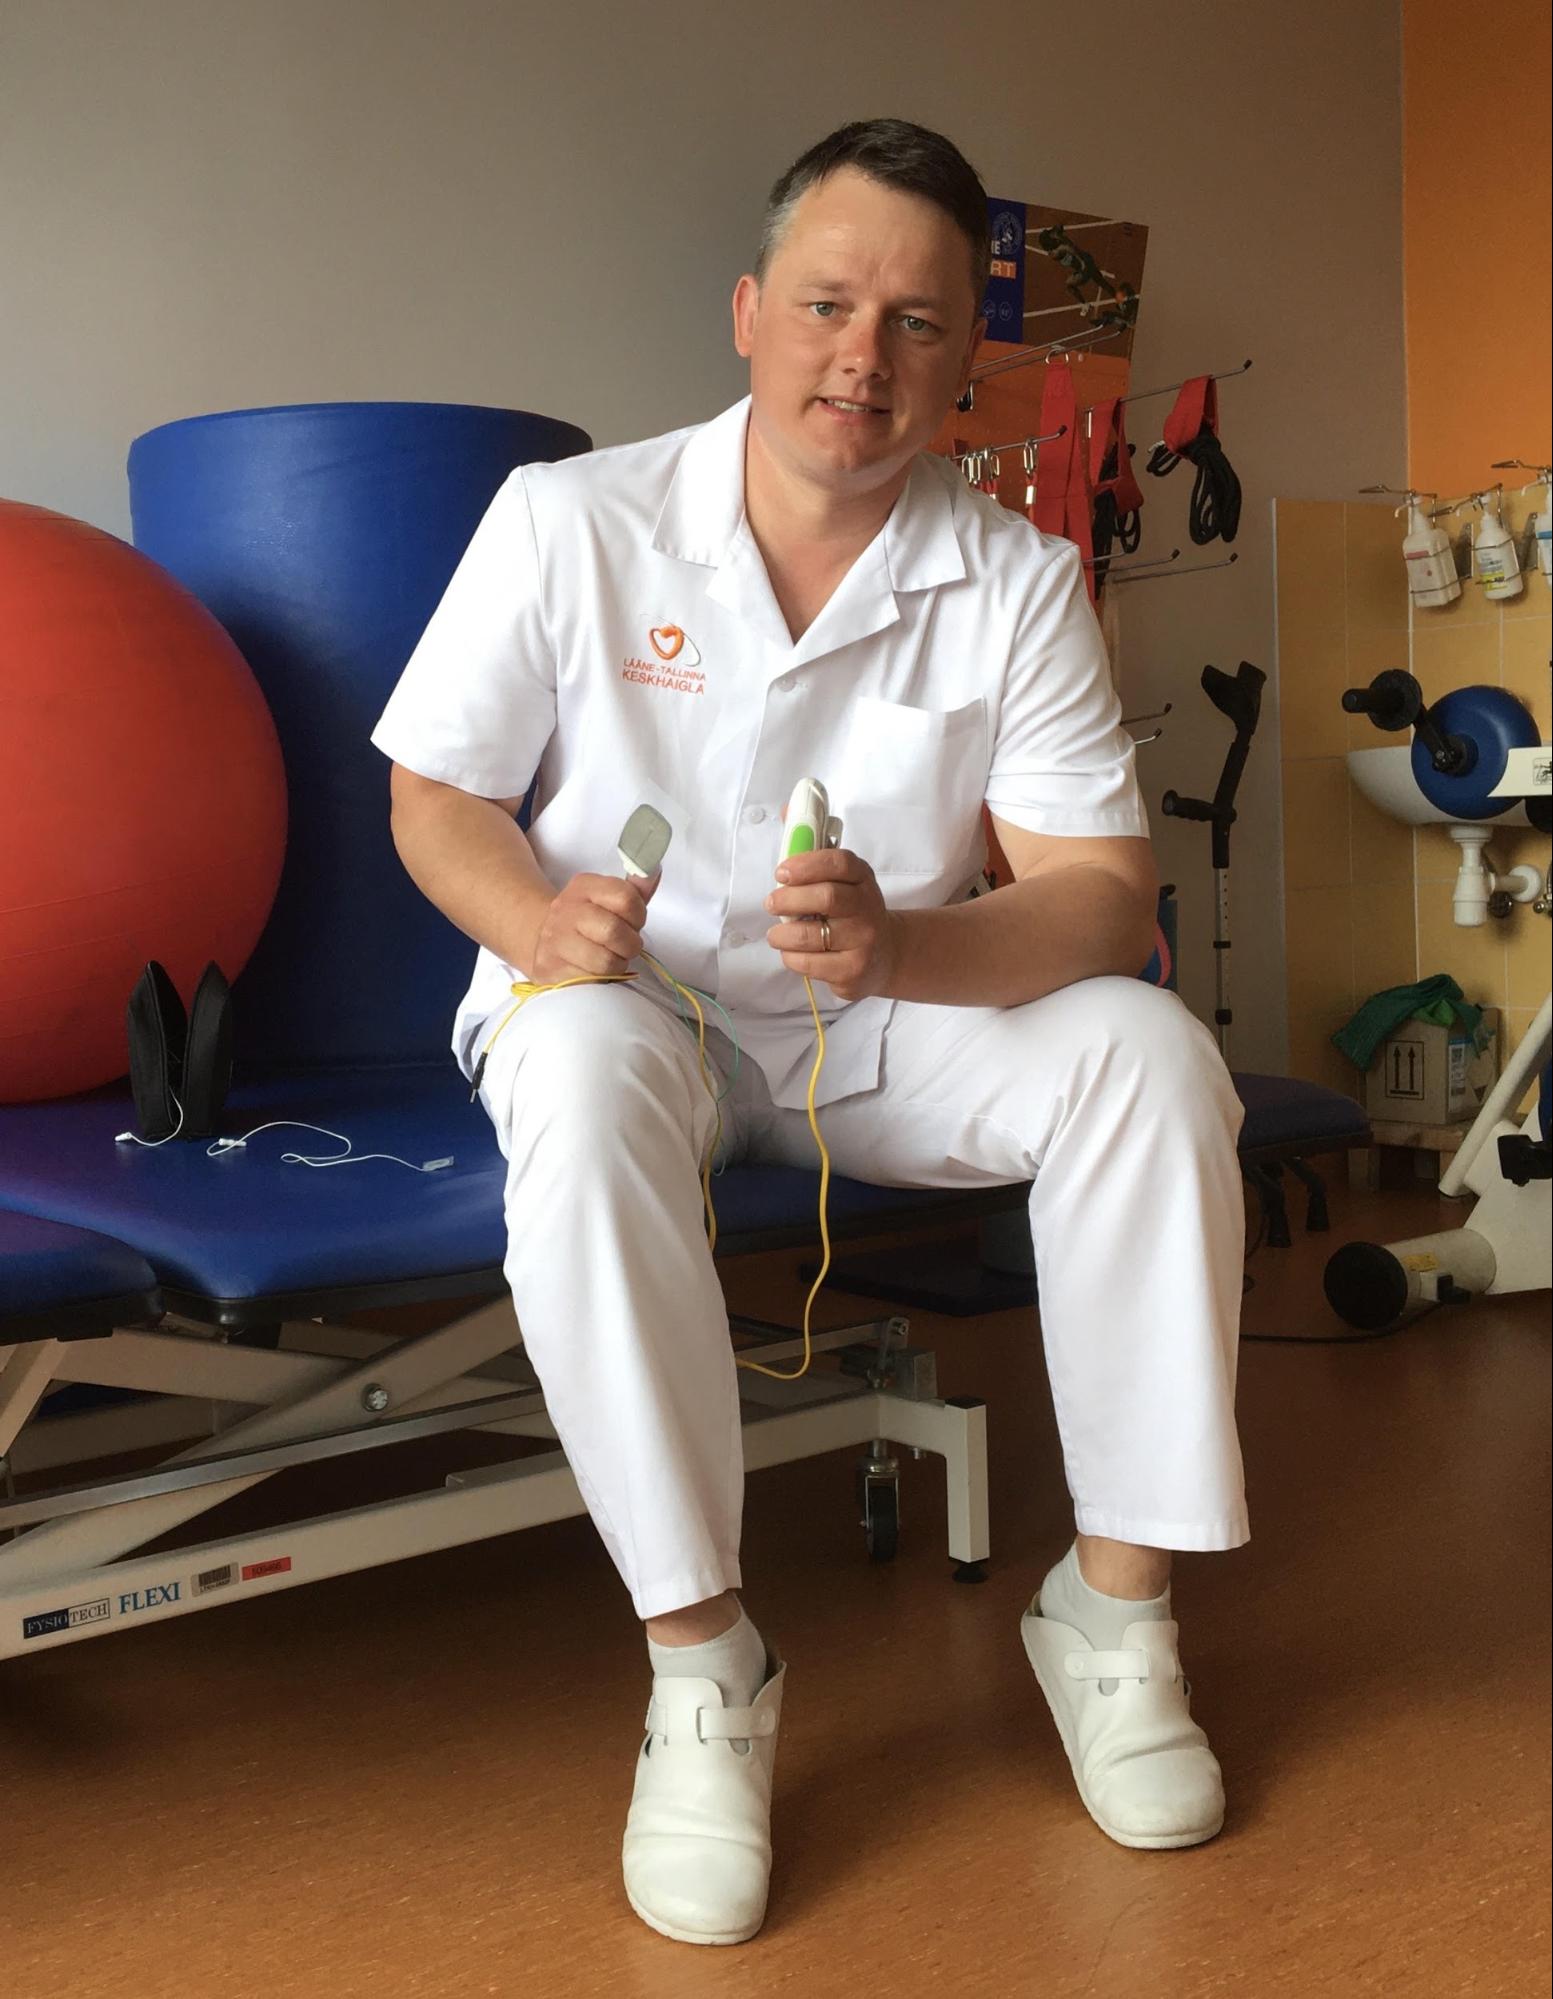 Heigo Maamägi sees how his patients are benefiting from tech solutions. Photo credit: private collection